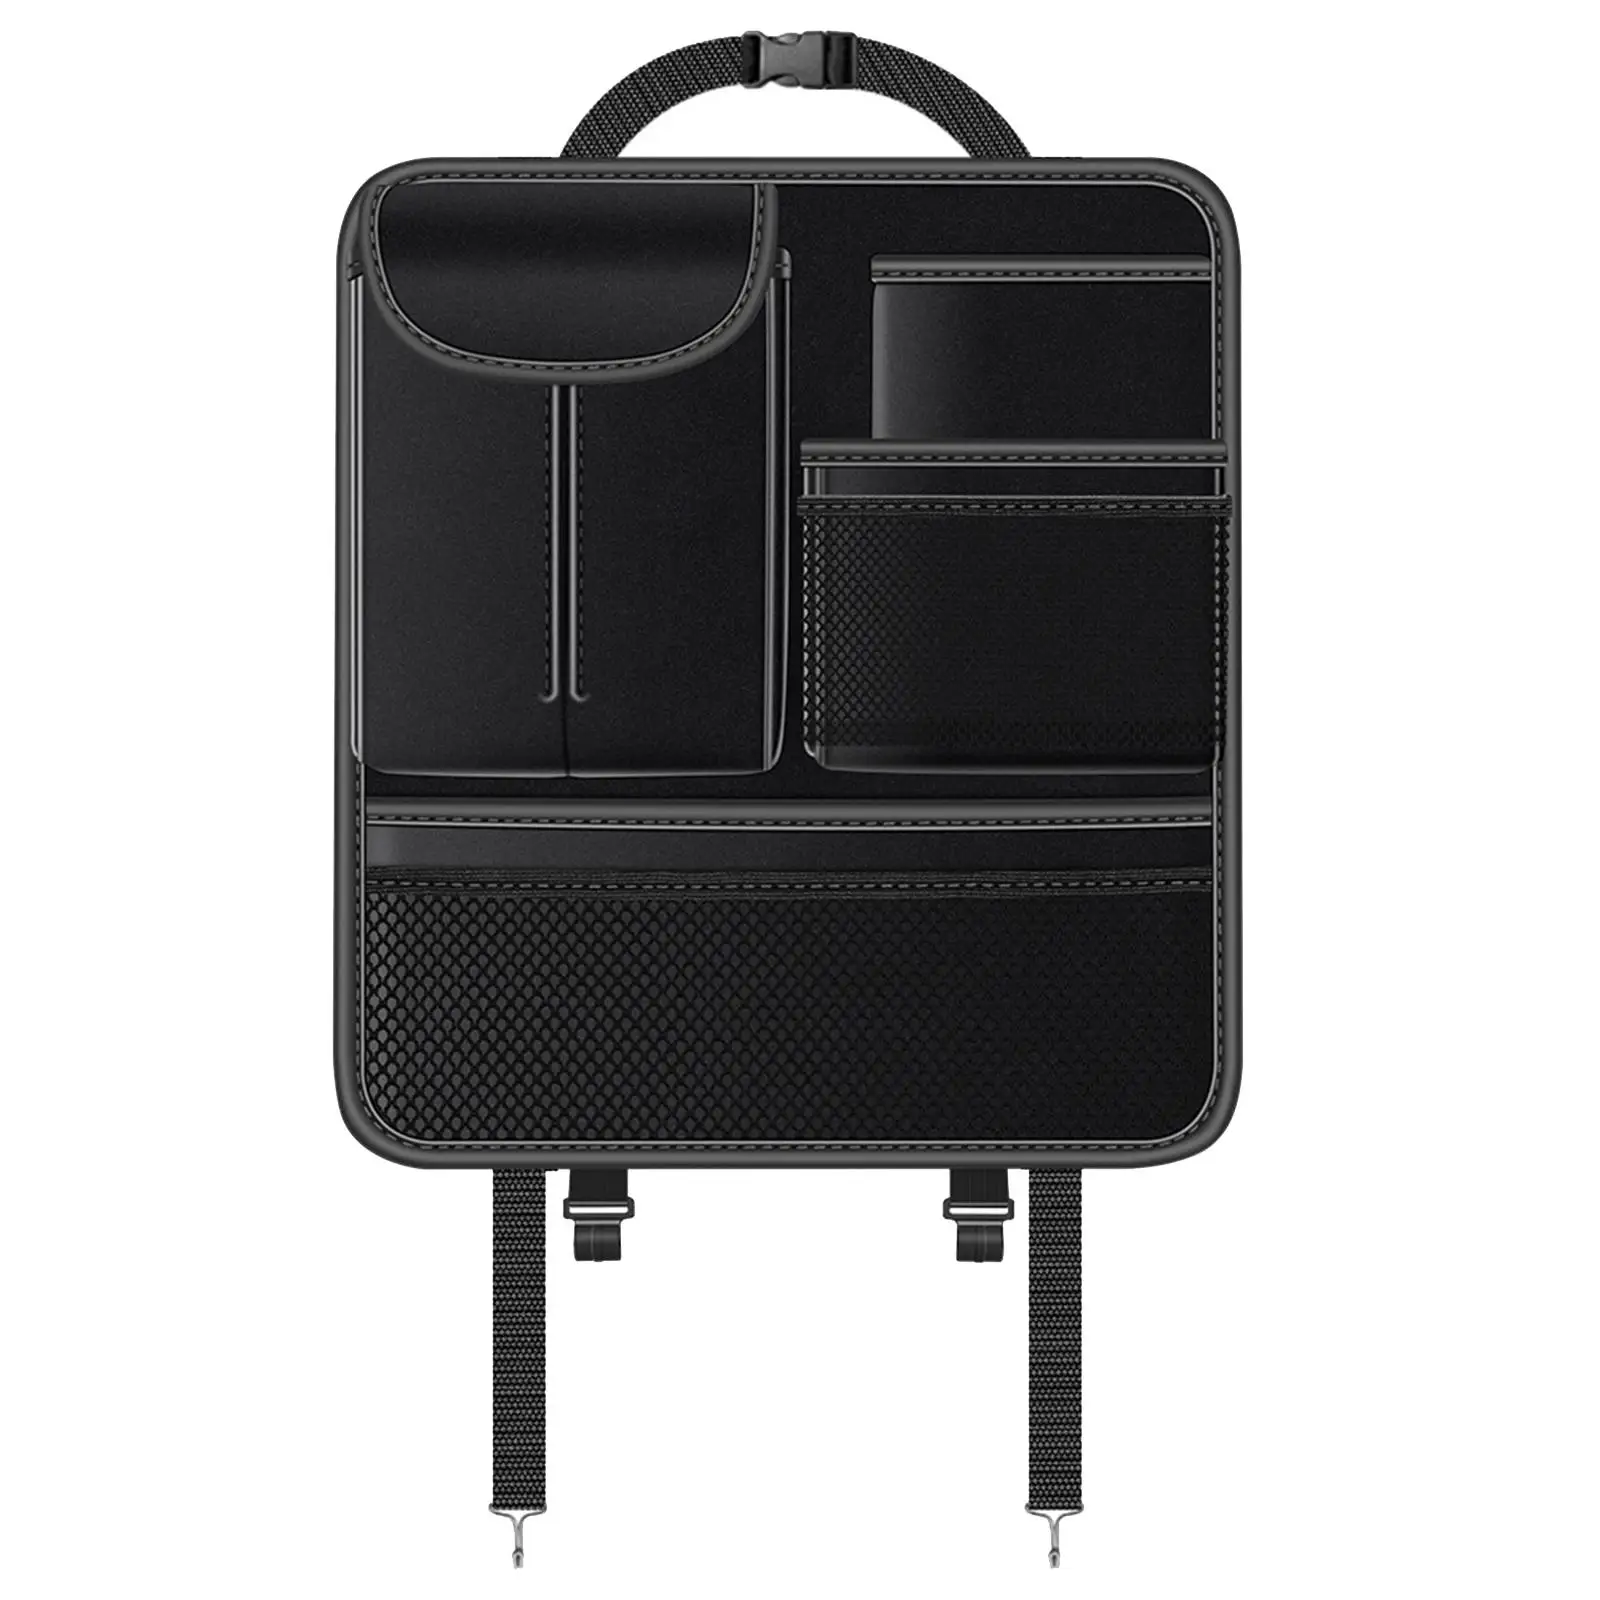 Car Back Seat Protector Storage Automotive Interior for Storing Mini Umbrella Phones Tablet Magazines Touch Screen Tablet Holder